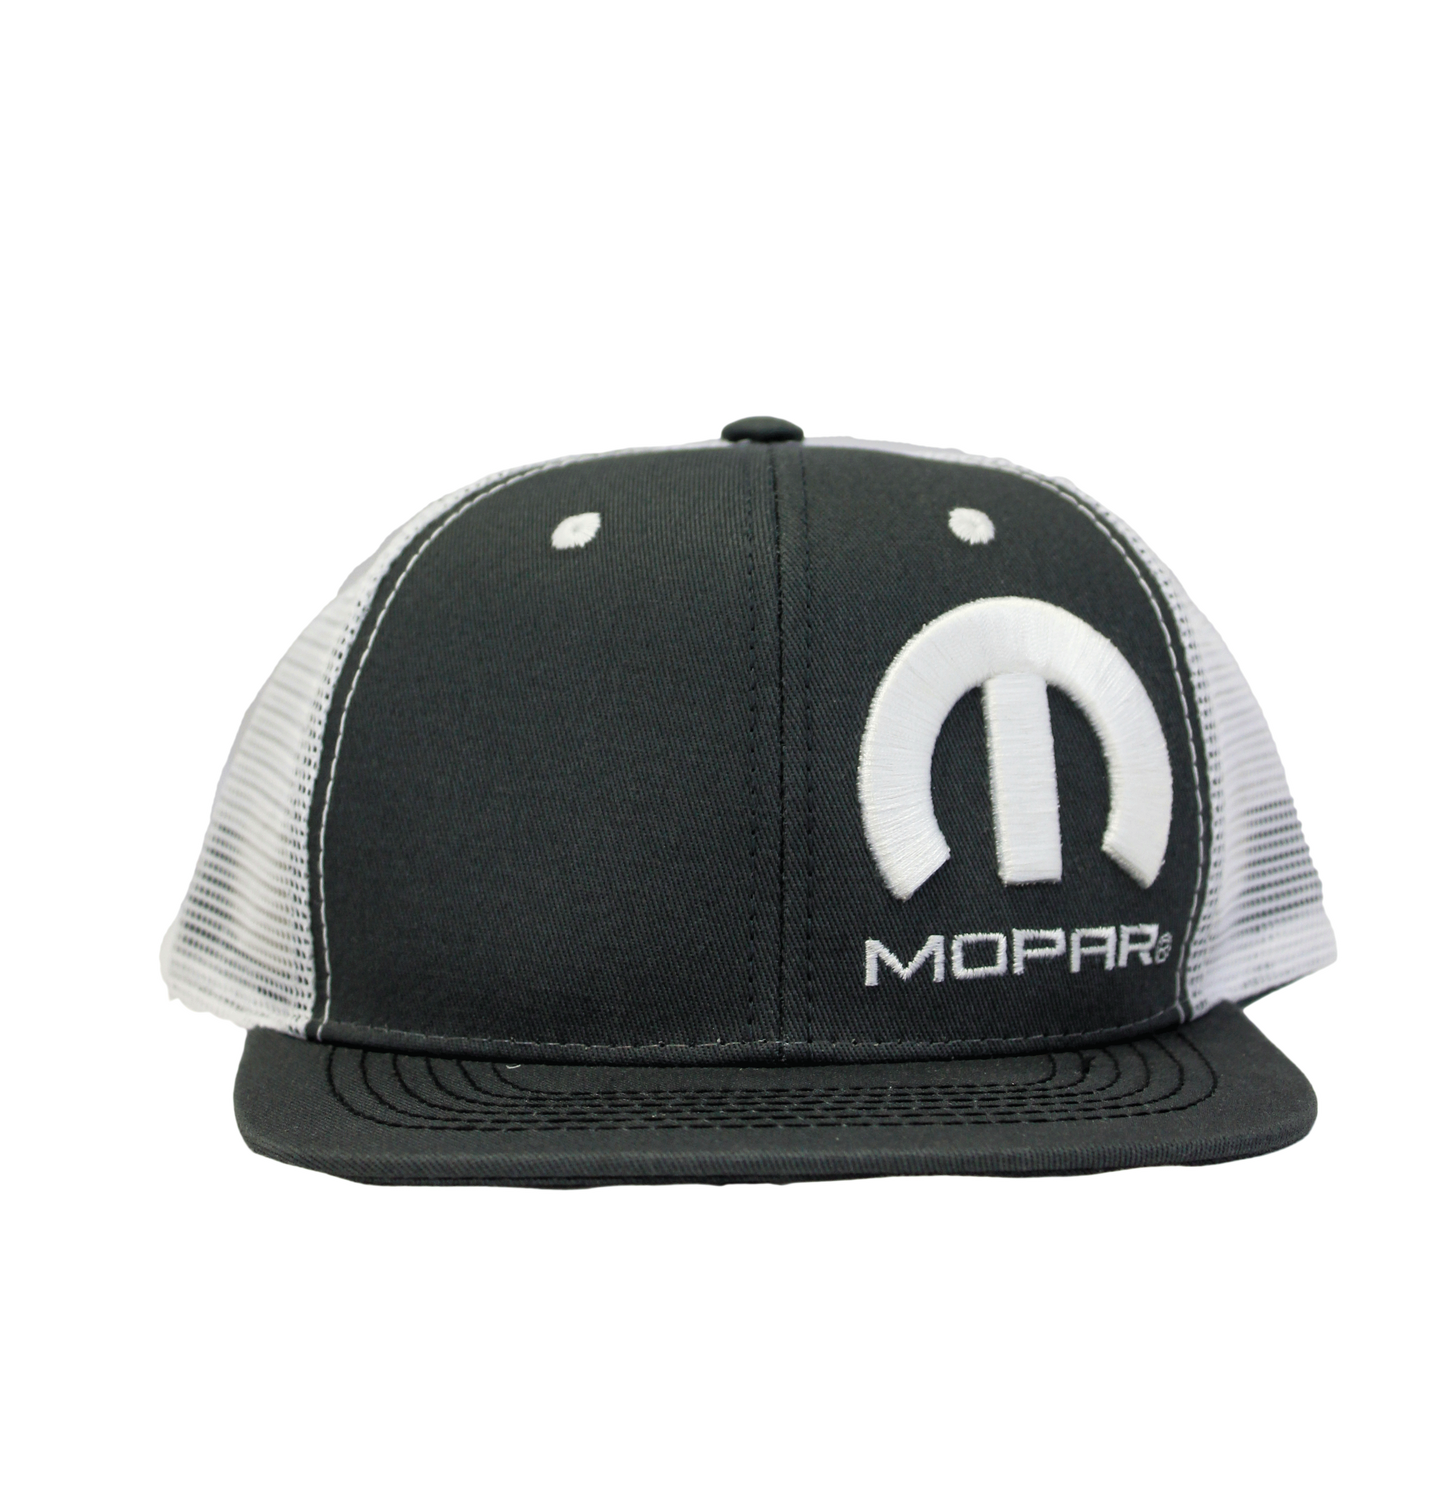 Mopar Logo Embroidered 6 Panel Hat - Charcoal Grey/White